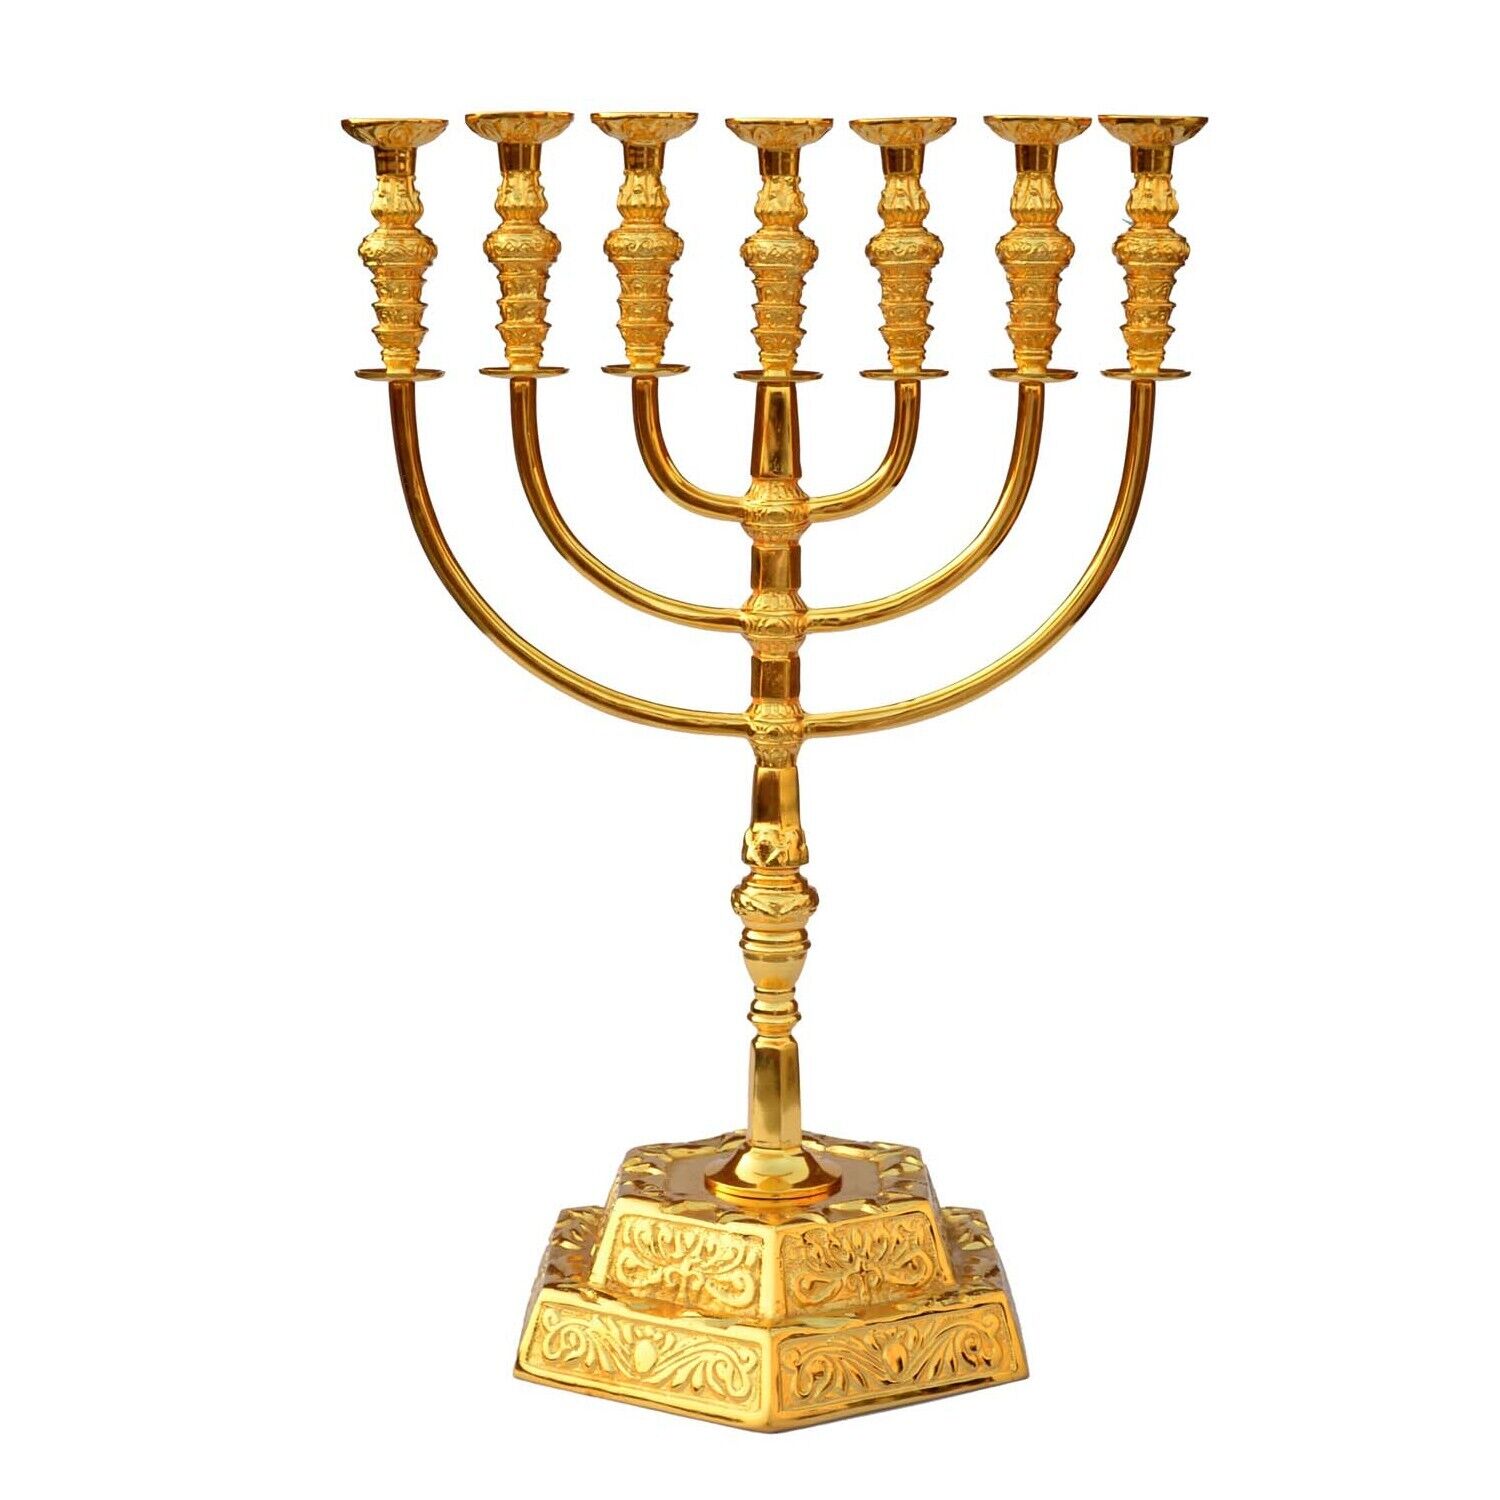 30 Inches Handmade Religious Gold Plated 7 Branch Large Old Temple Menorah